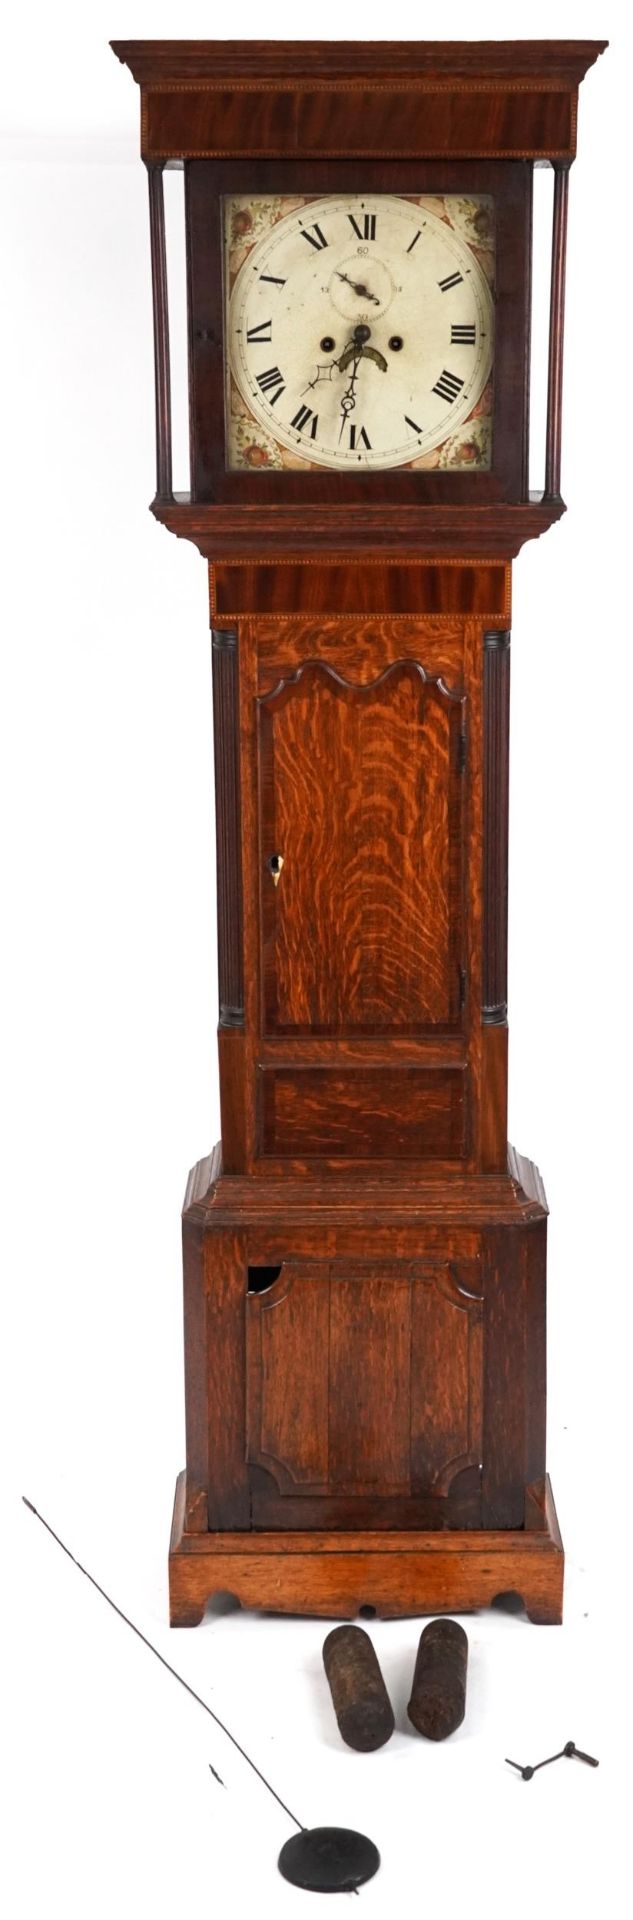 19th century oak and mahogany longcase clock with enamelled dial, 202cm high : For further - Image 2 of 6